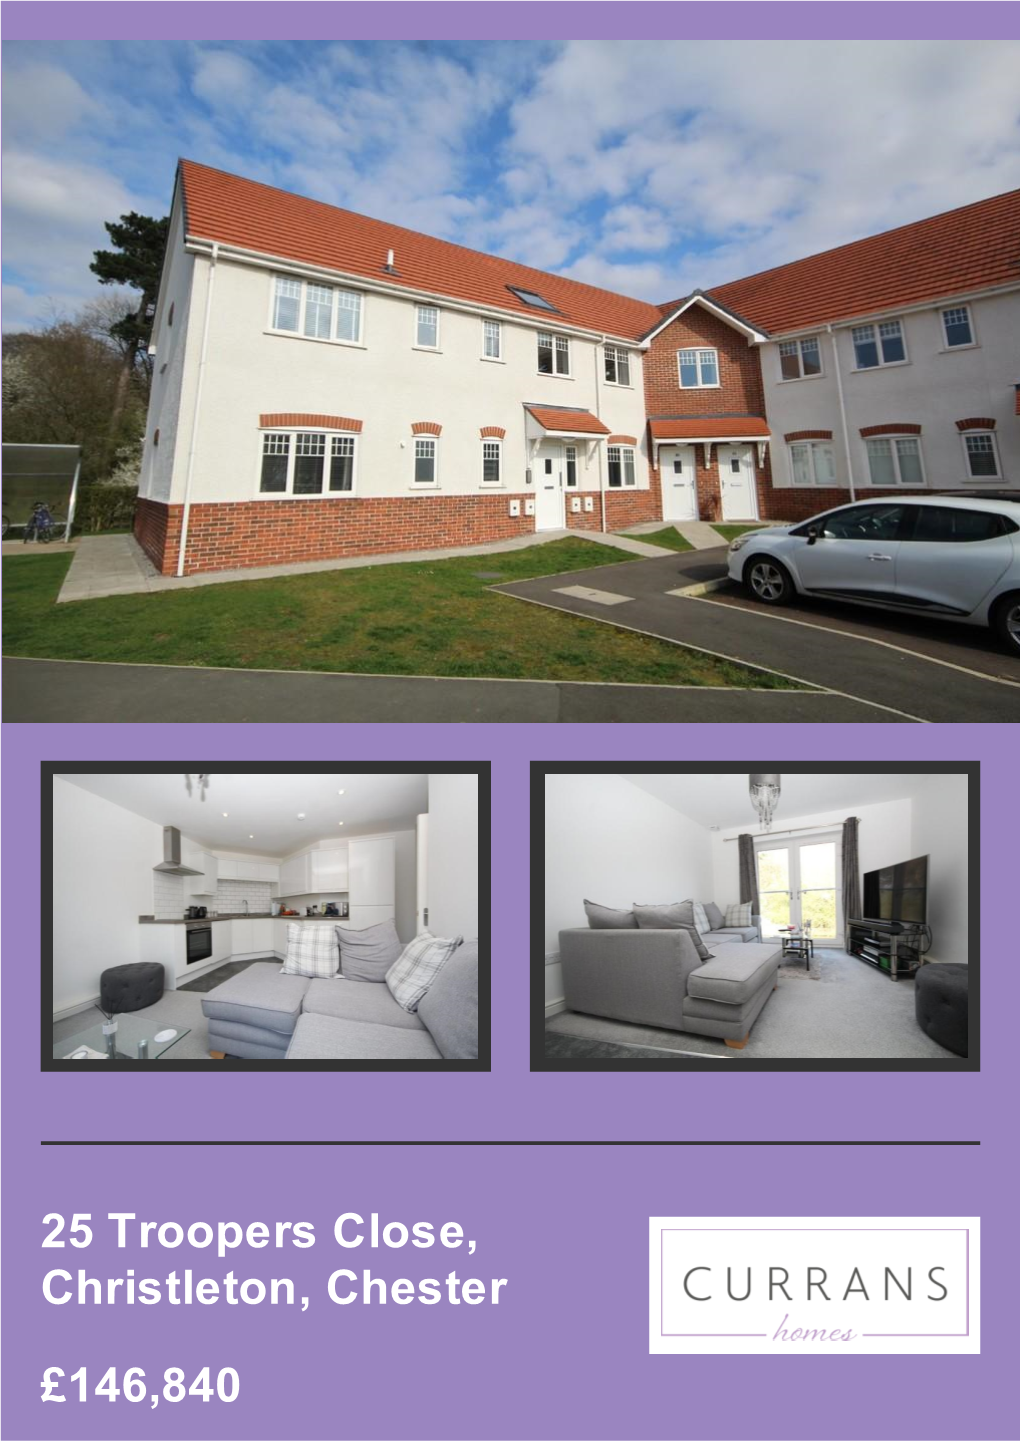 25 Troopers Close, Christleton, Chester £146,840